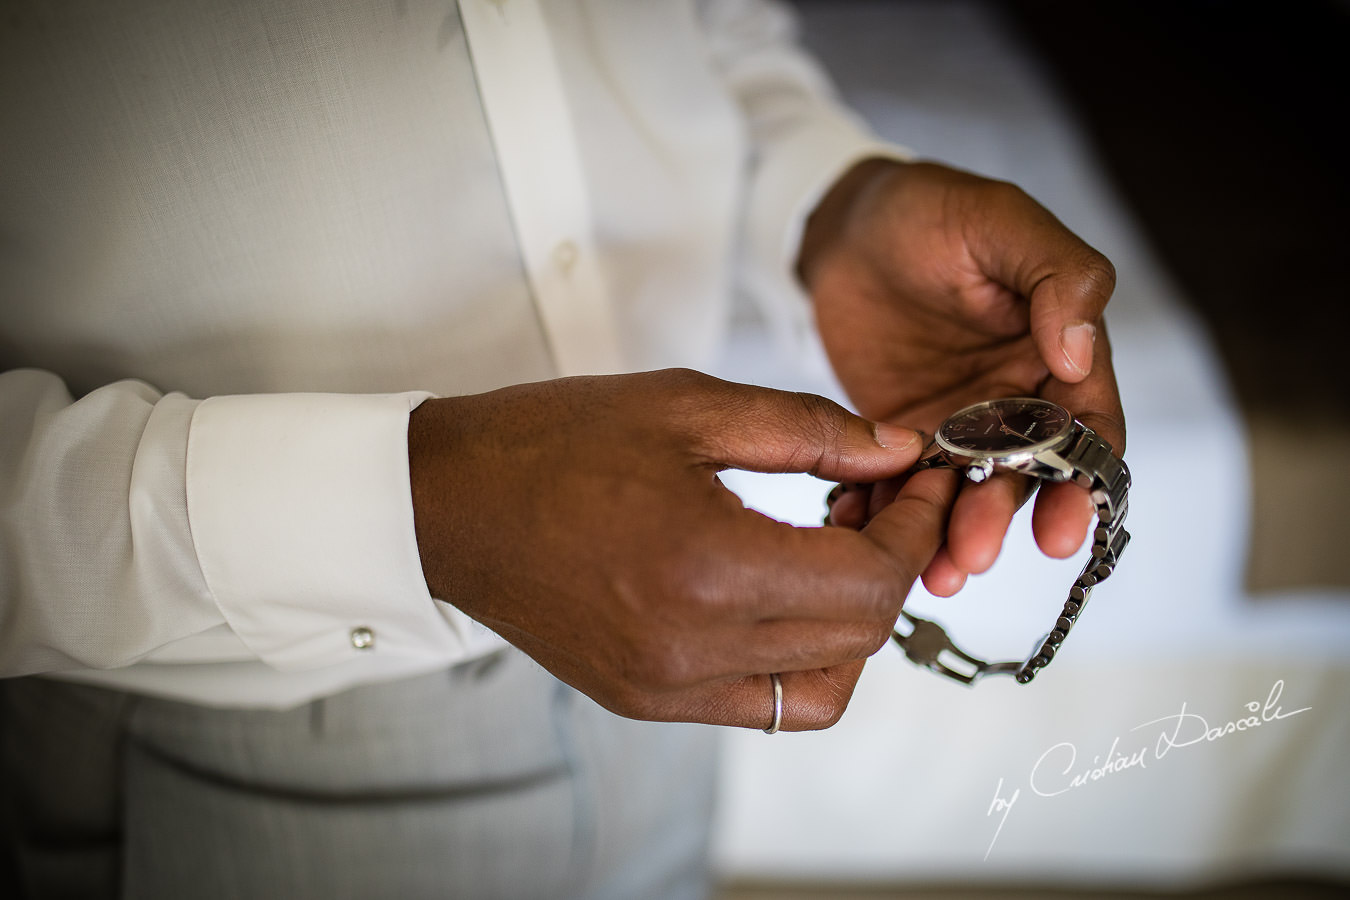 Groom setting his watch, moments captured during an Exquisite Wedding at Asterias Beach Hotel by Cyprus Photographer Cristian Dascalu.